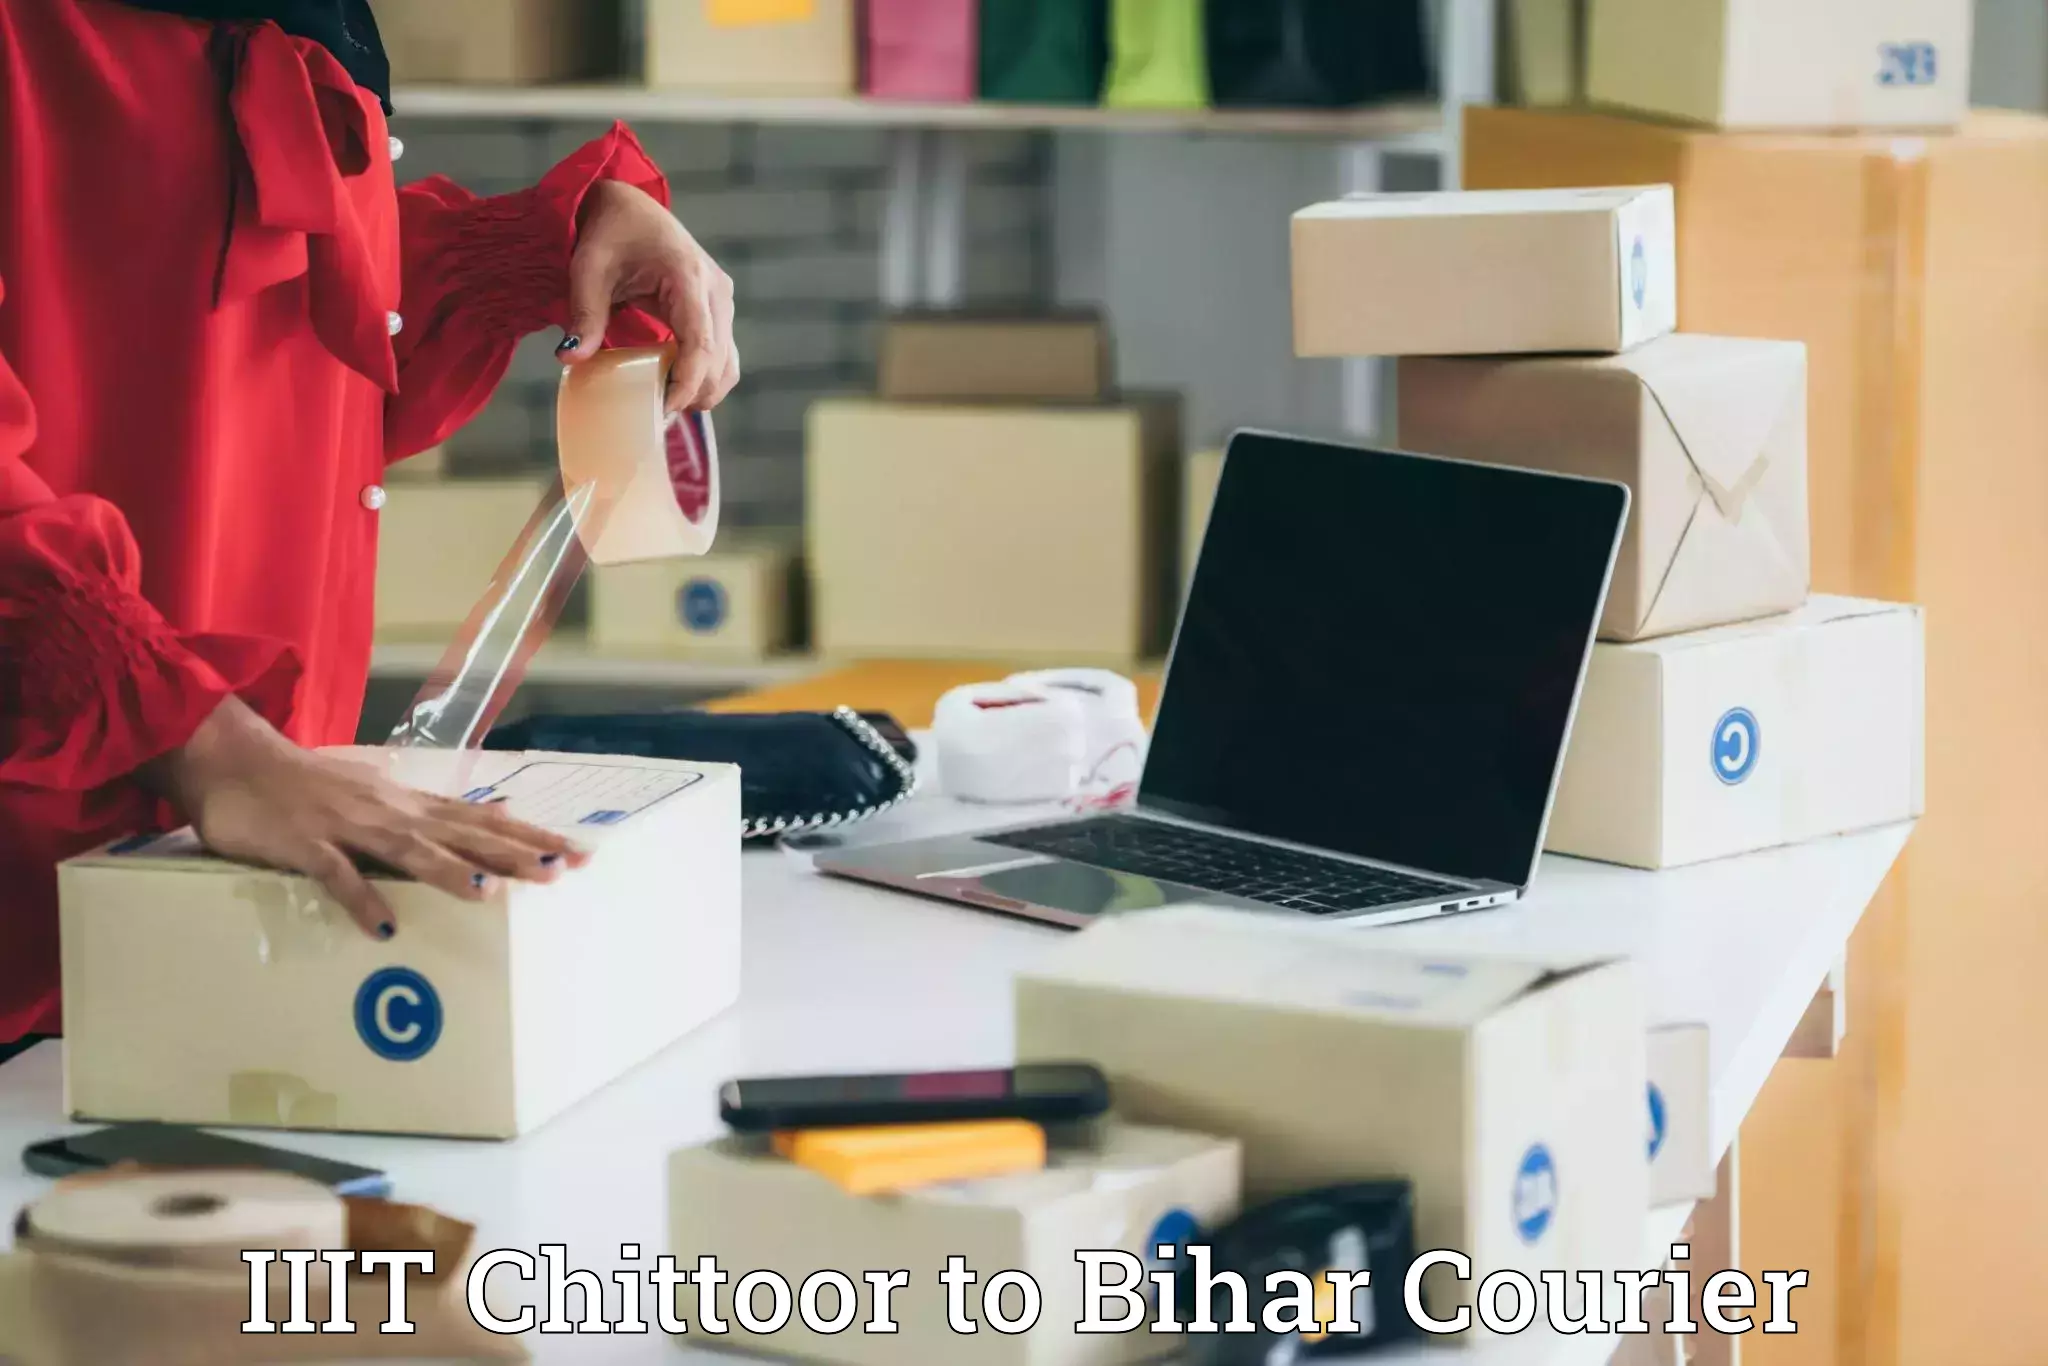 Full-service courier options IIIT Chittoor to Fatwah